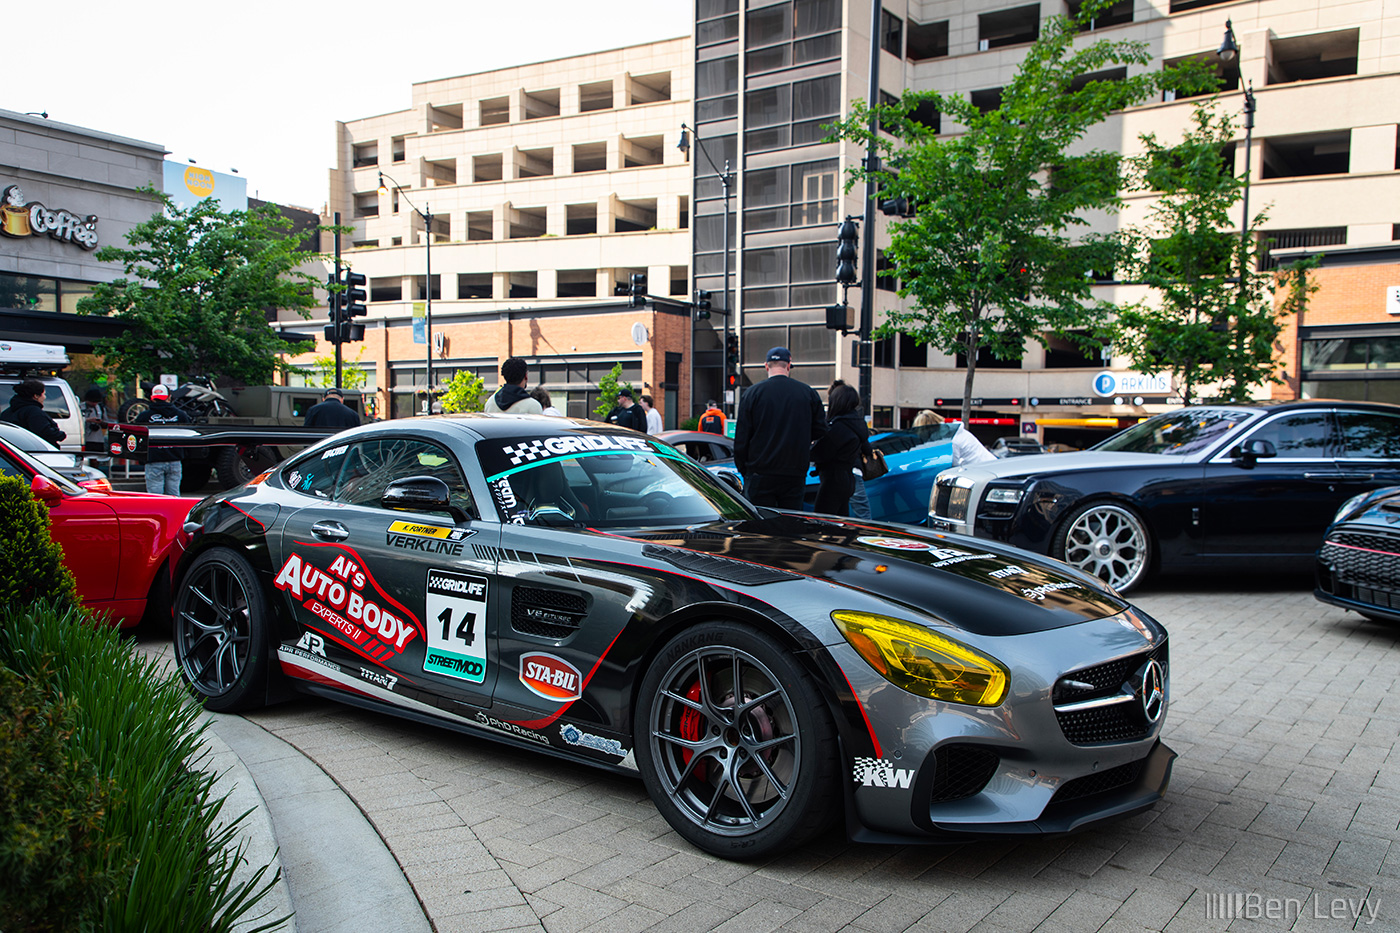 AMG GT Track Car in Chicago